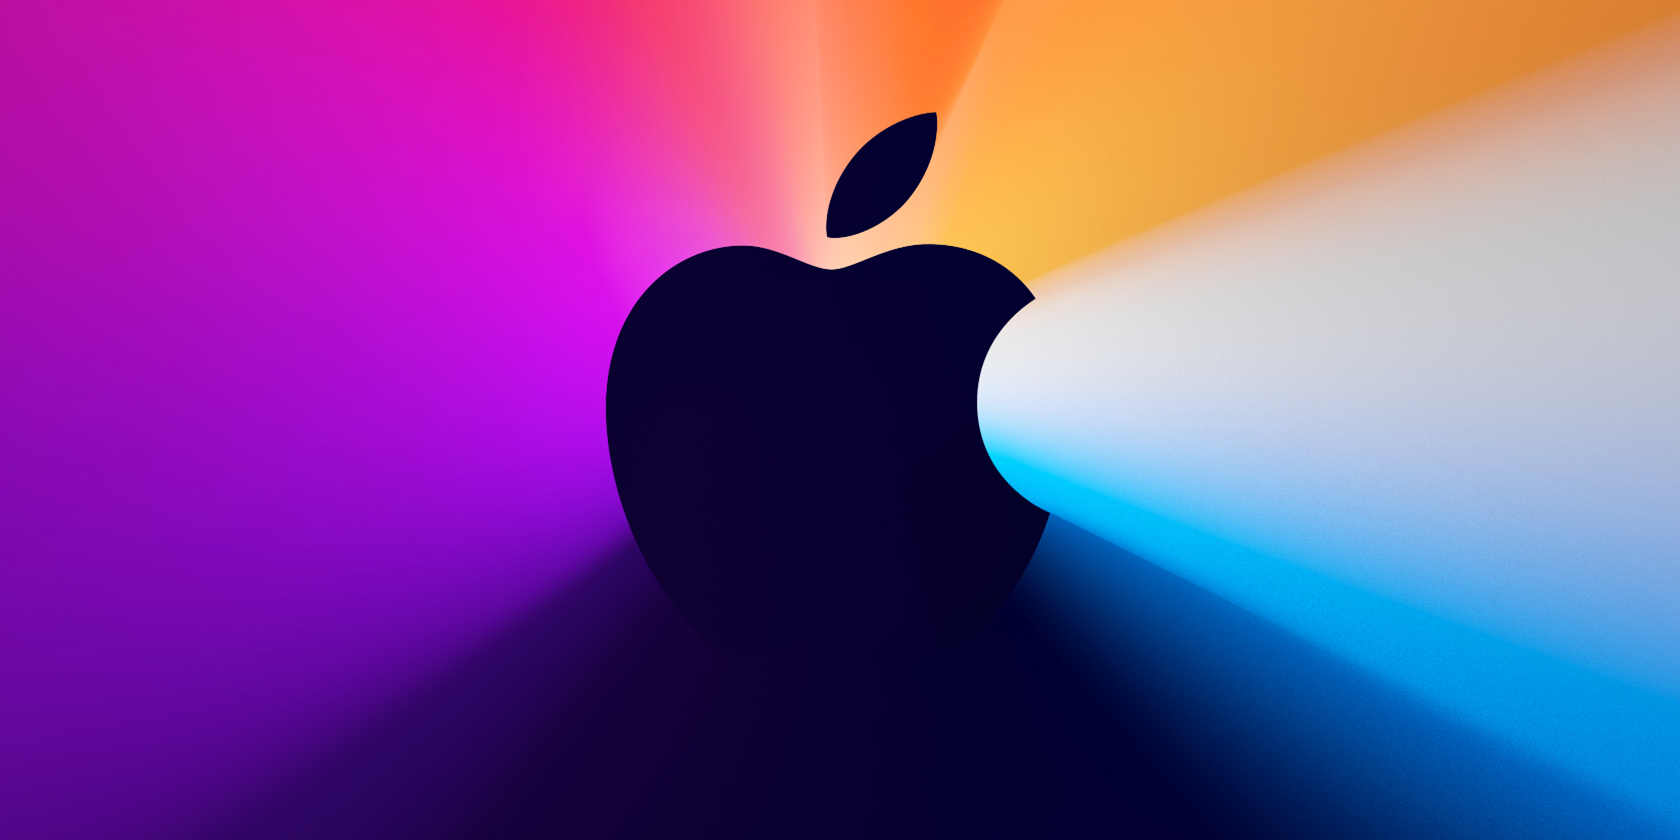 Report: Apple May Not Have a March 16 Event After All